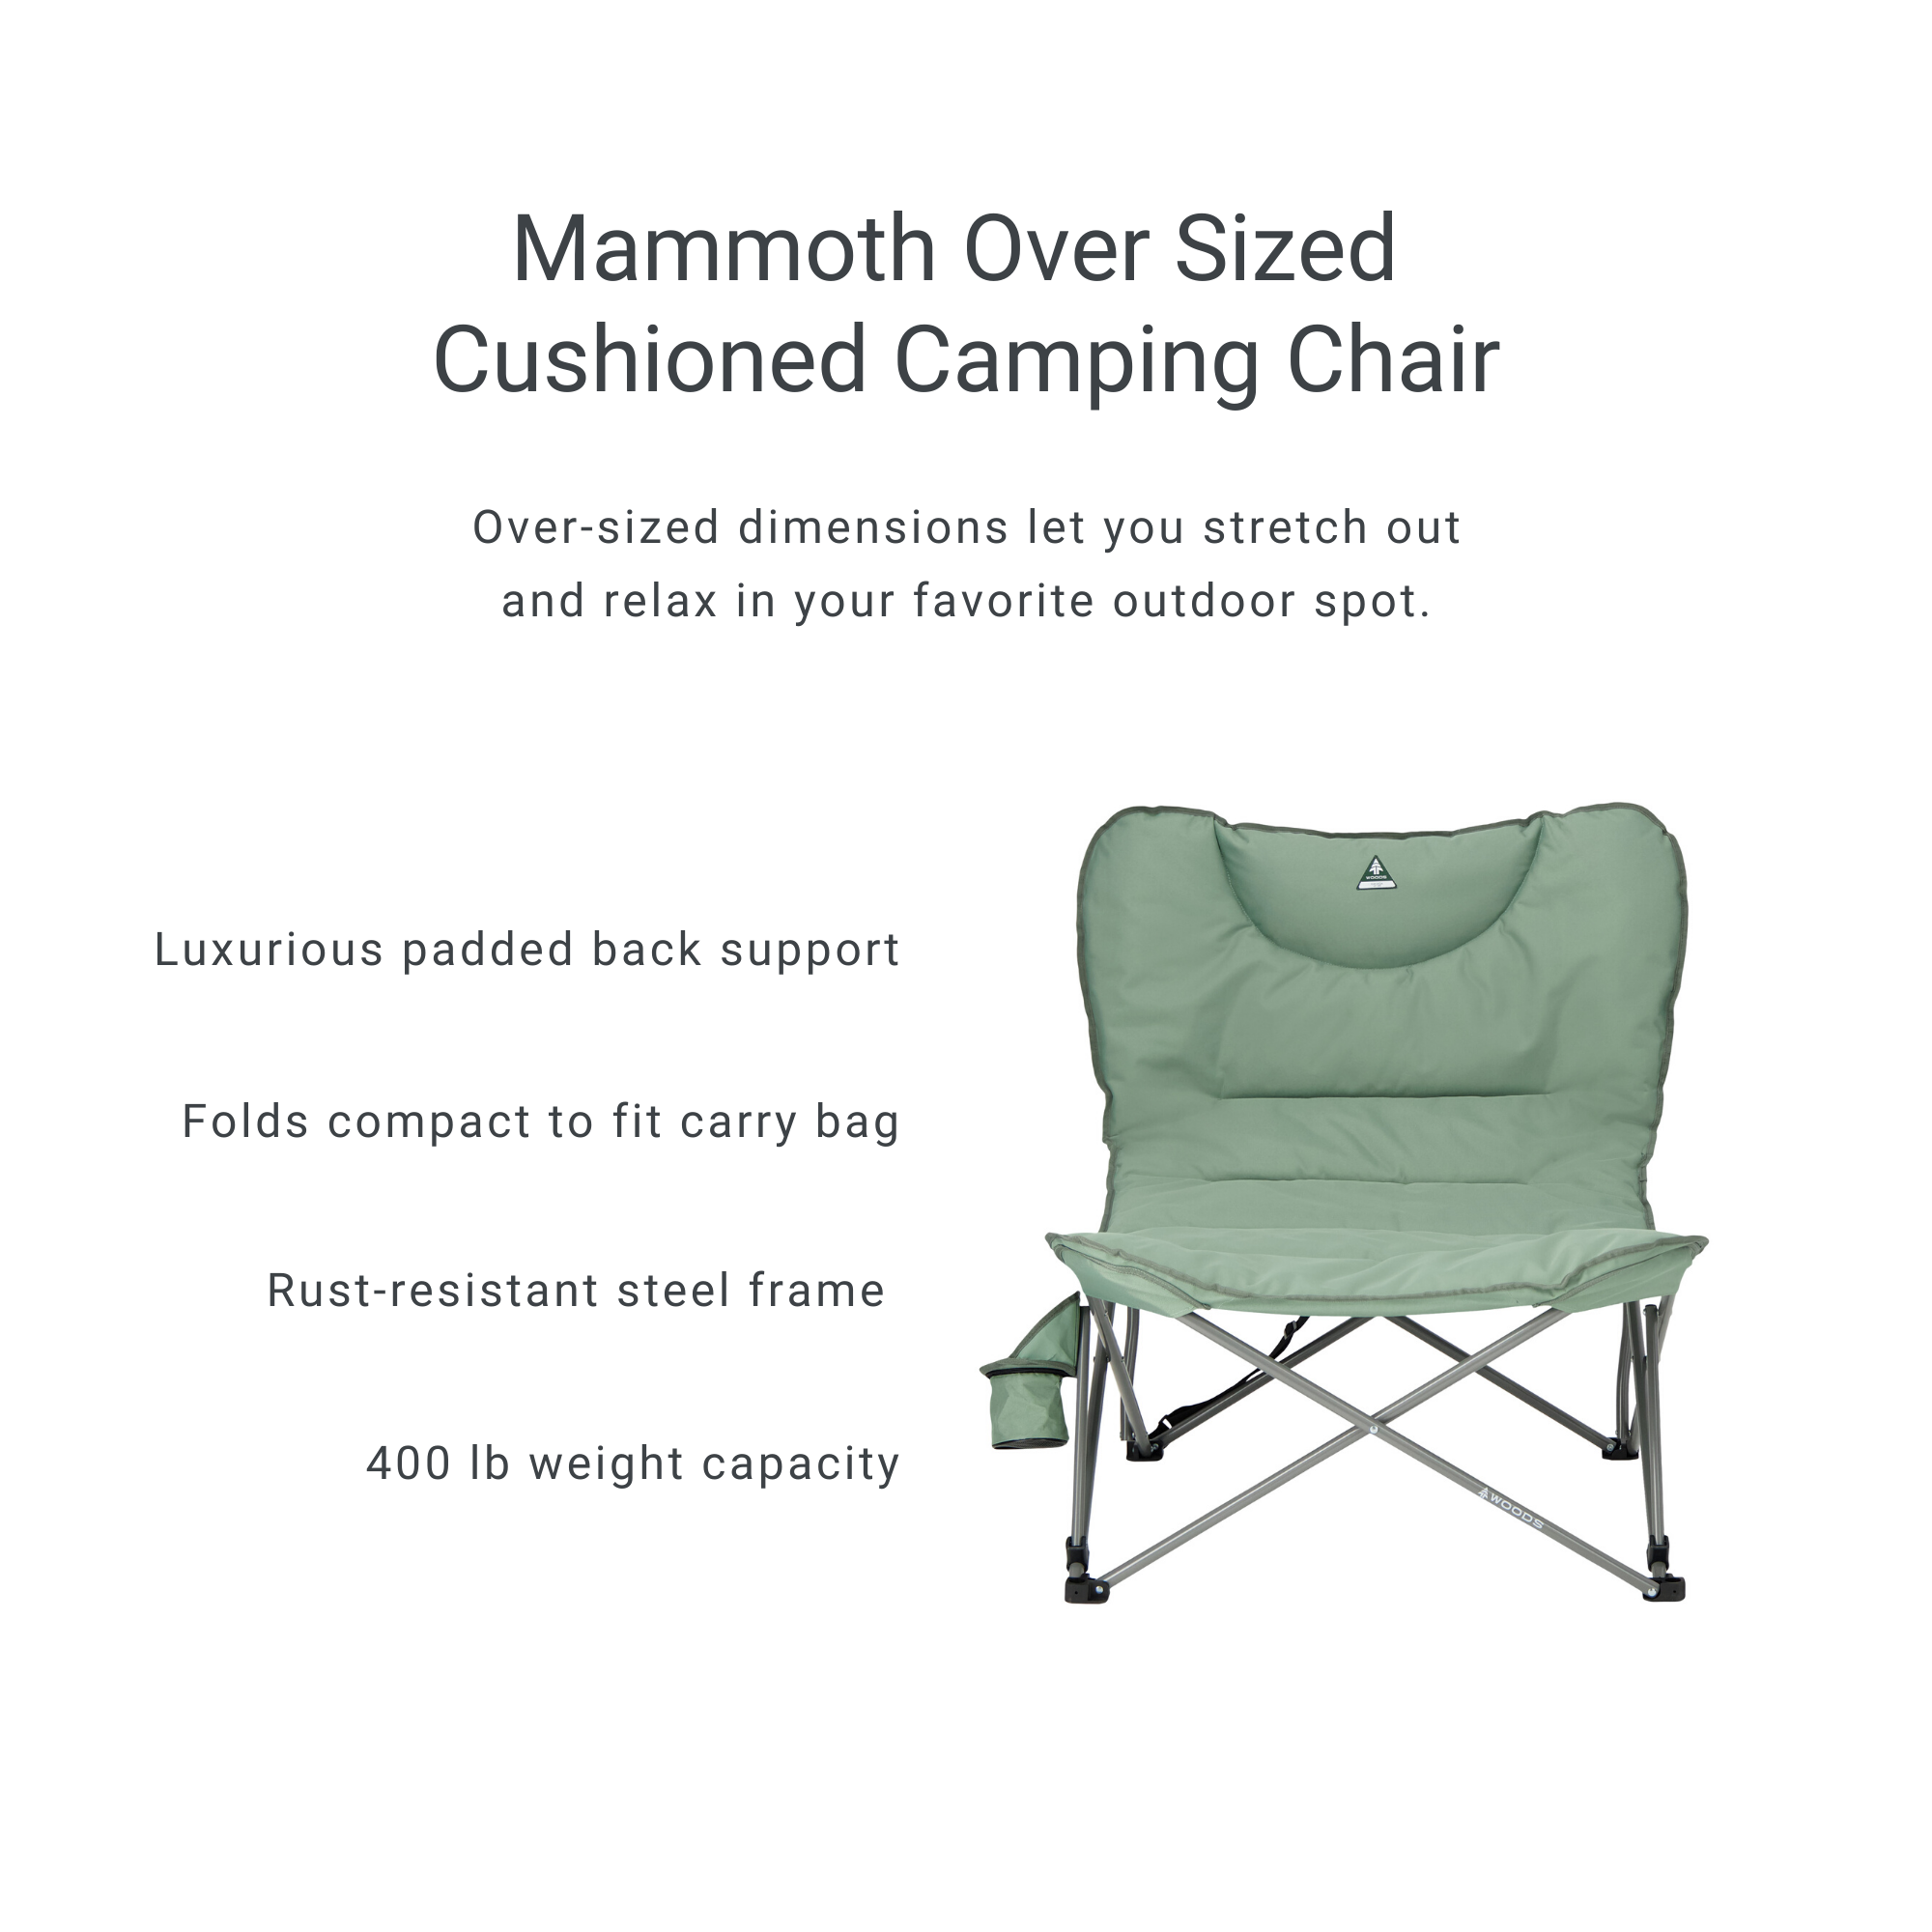 camping chairs 400 lb weight capacity